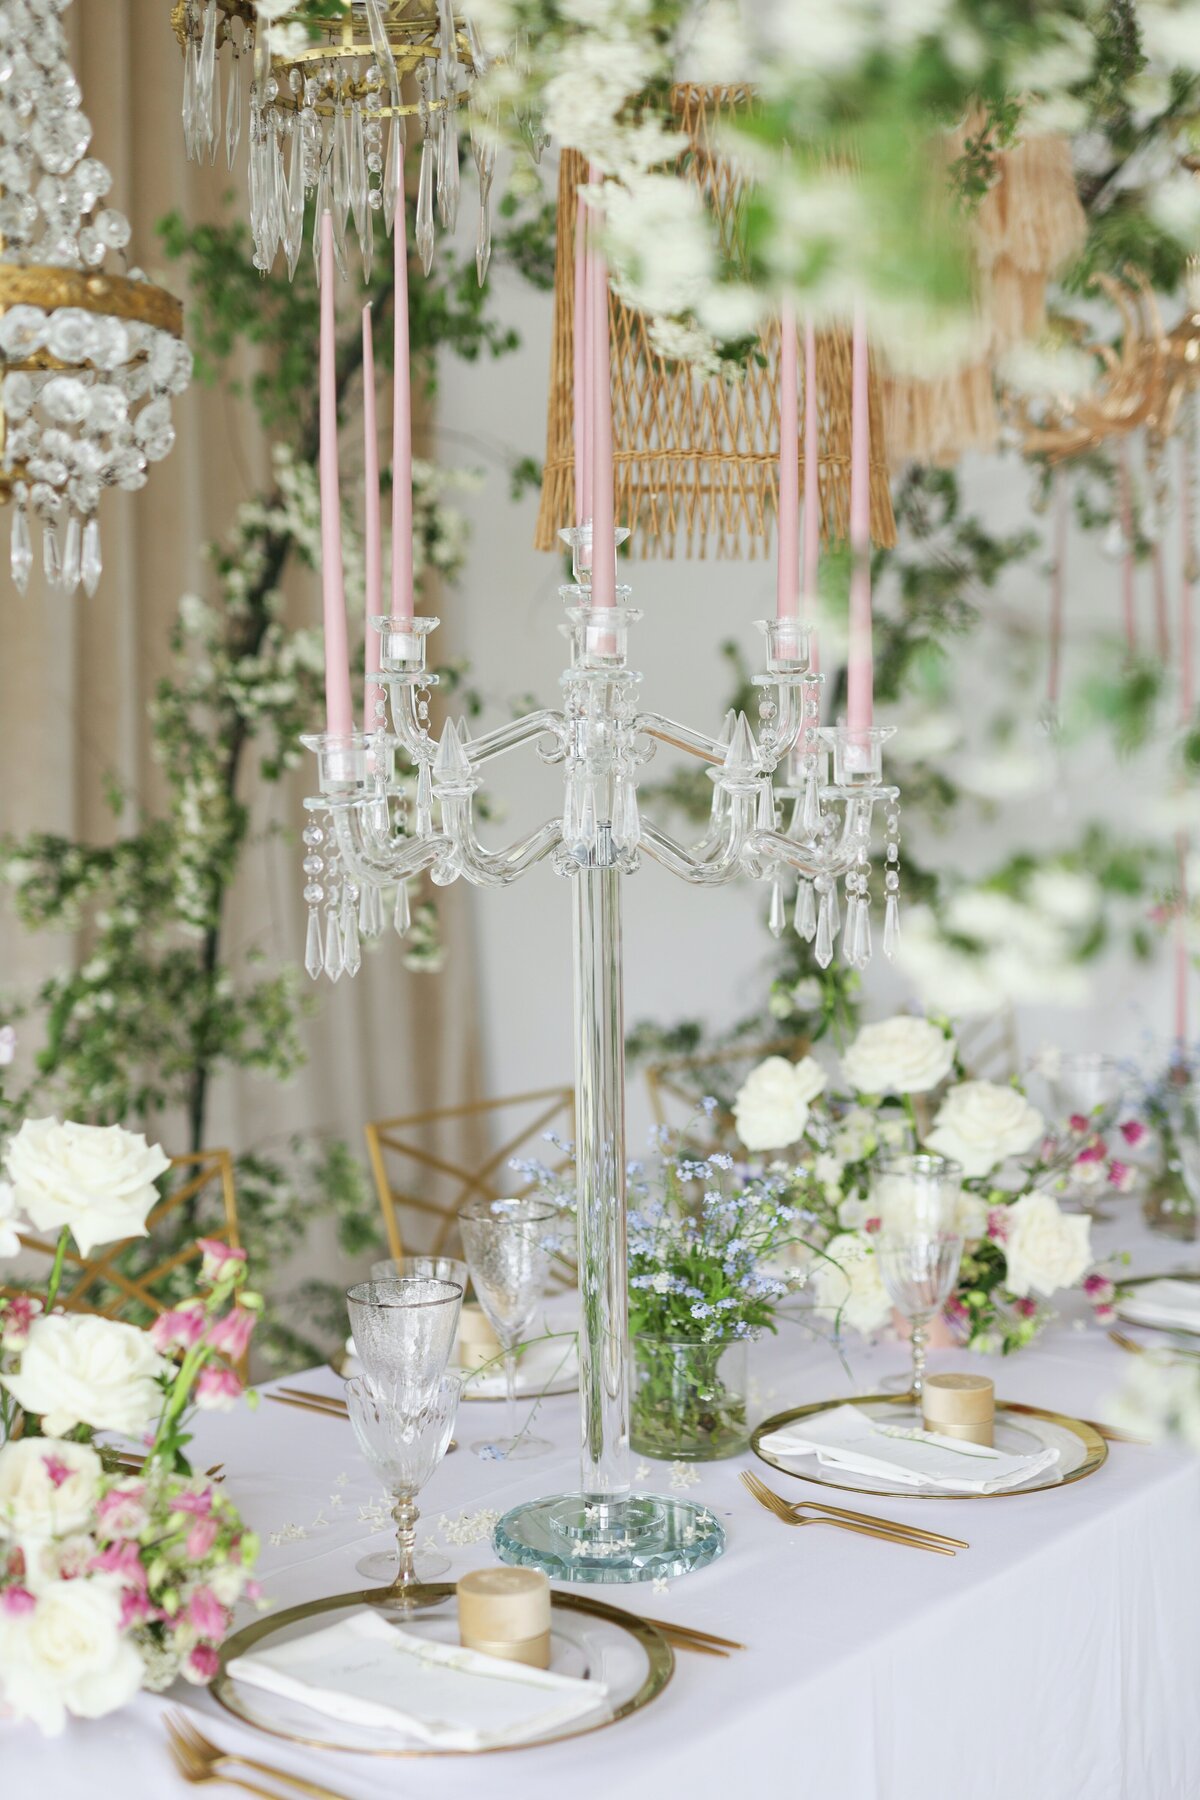 A romantic table setting with candles and flowers.